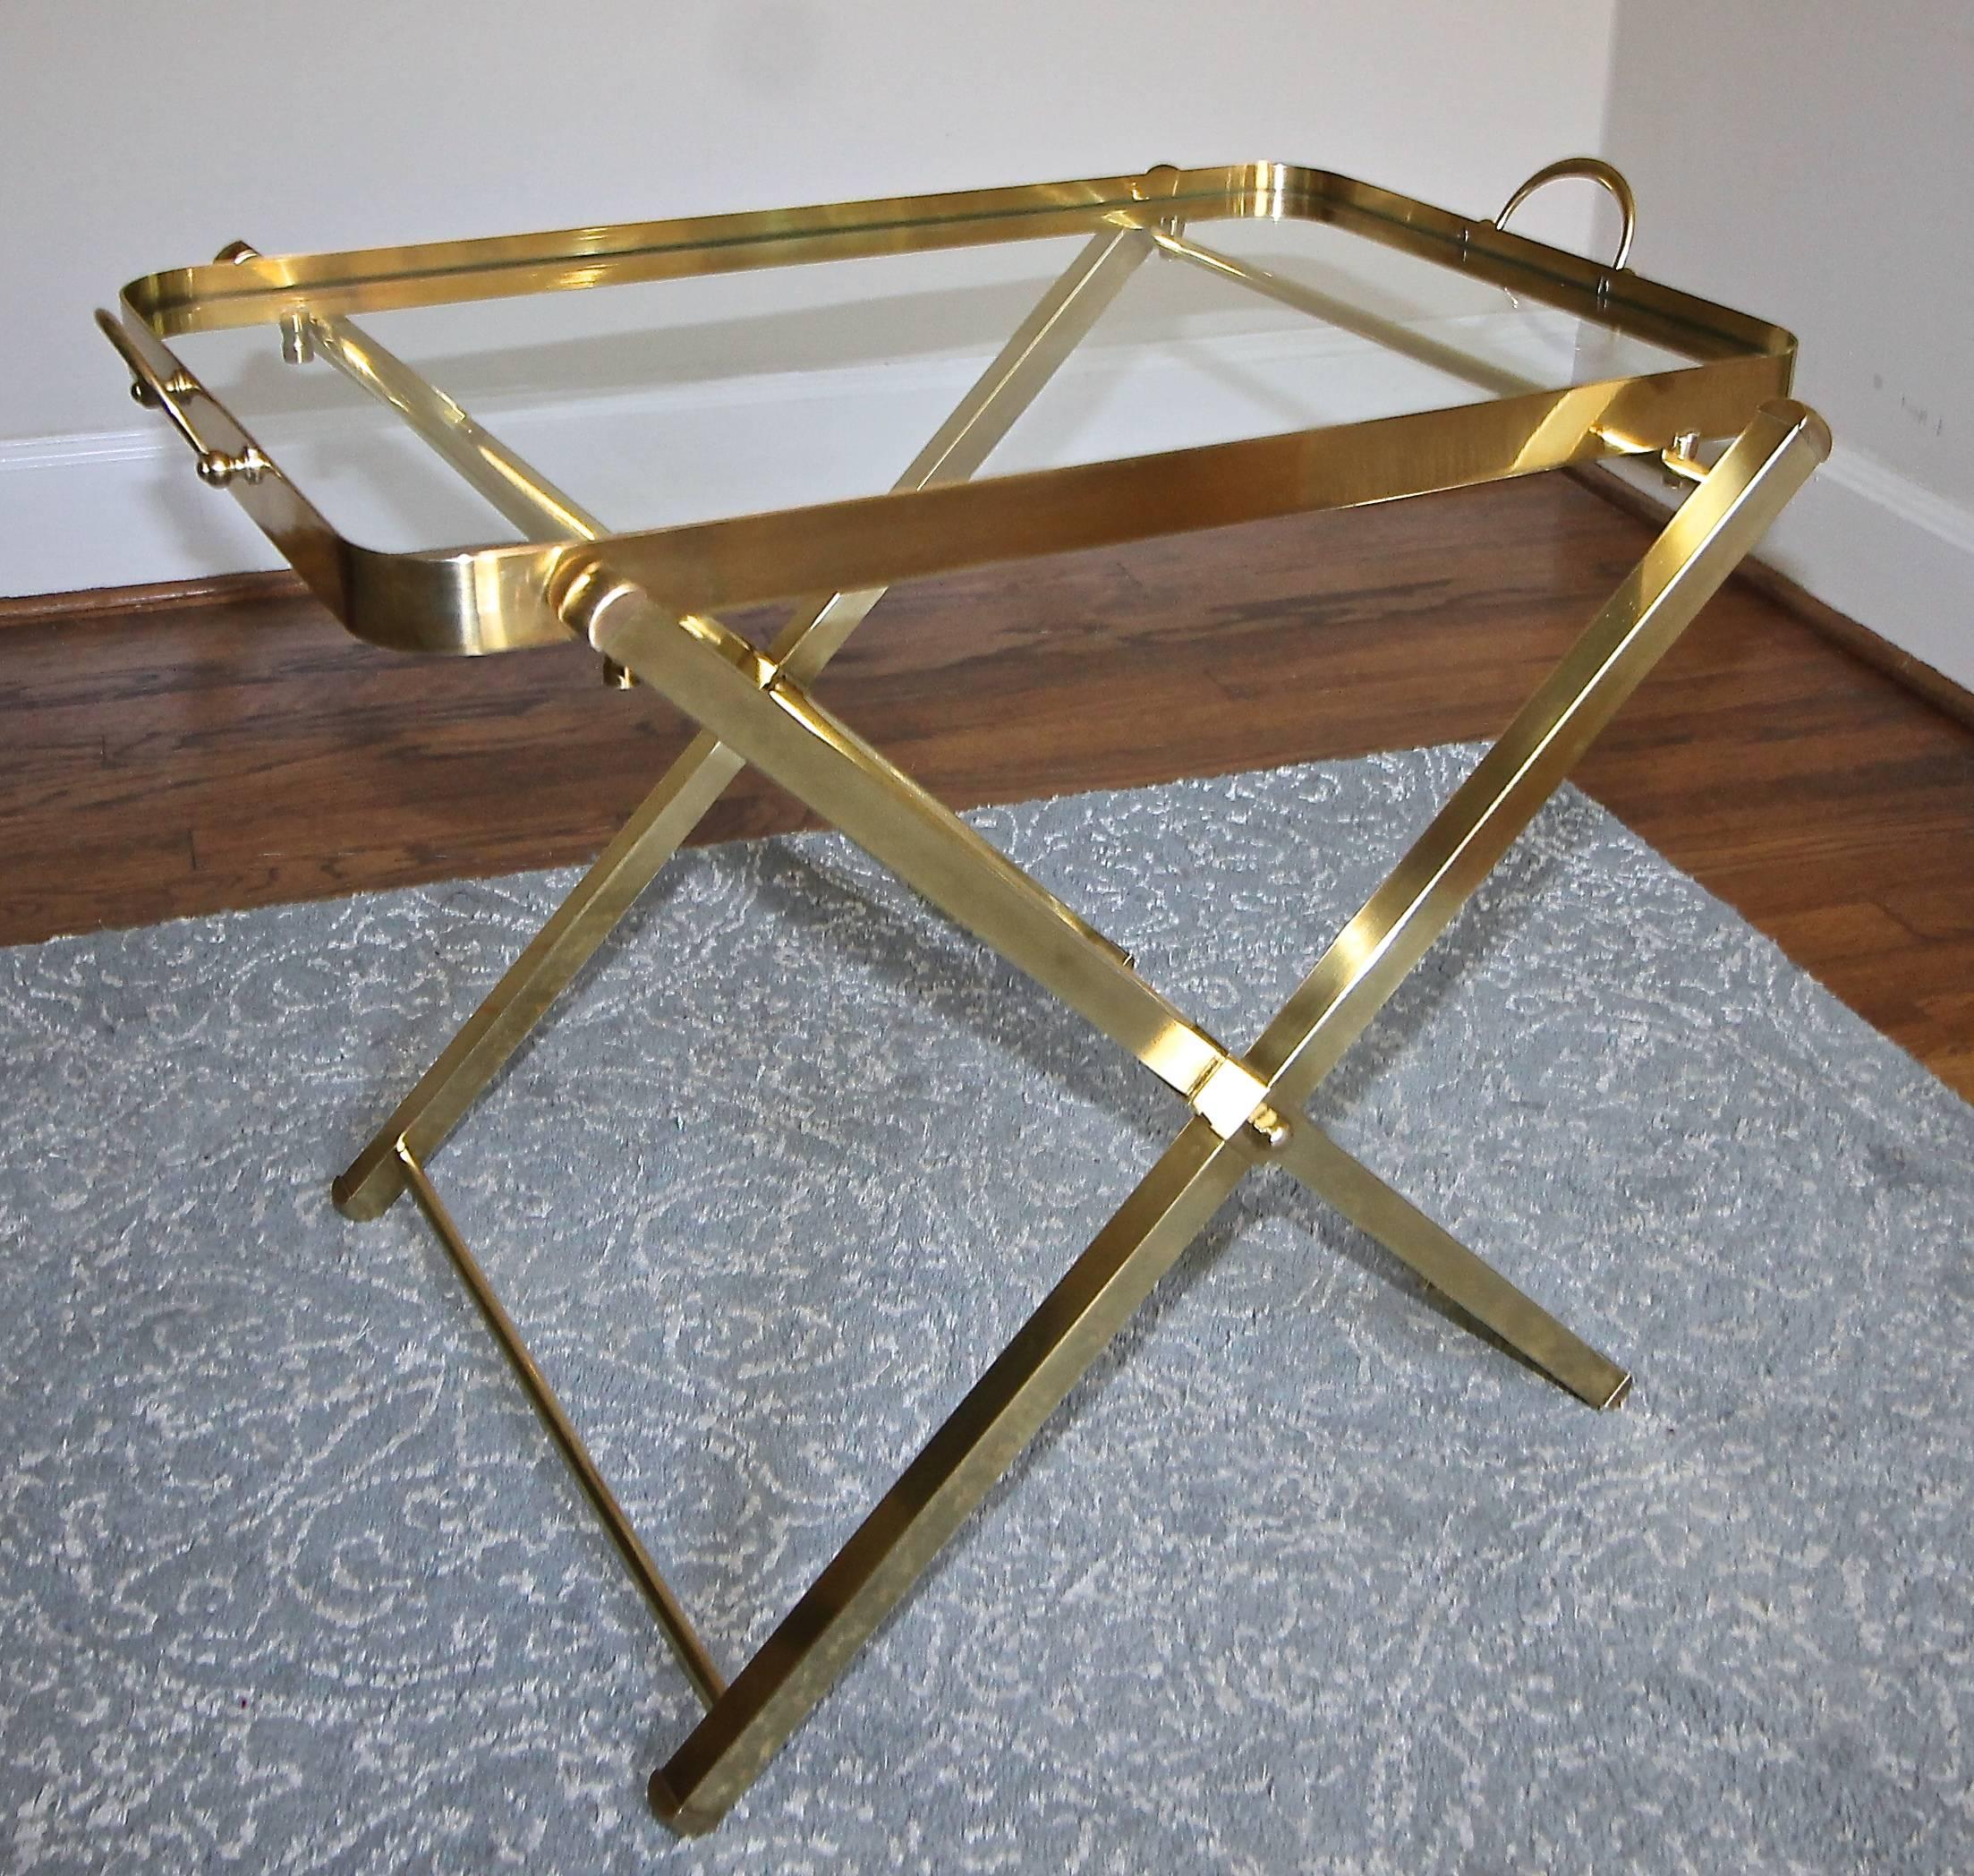 Italian brass folding side or end table with removable glass inset serving tray. X-base folds and can be stored and makes an excellent additional serving table for tight spaces.